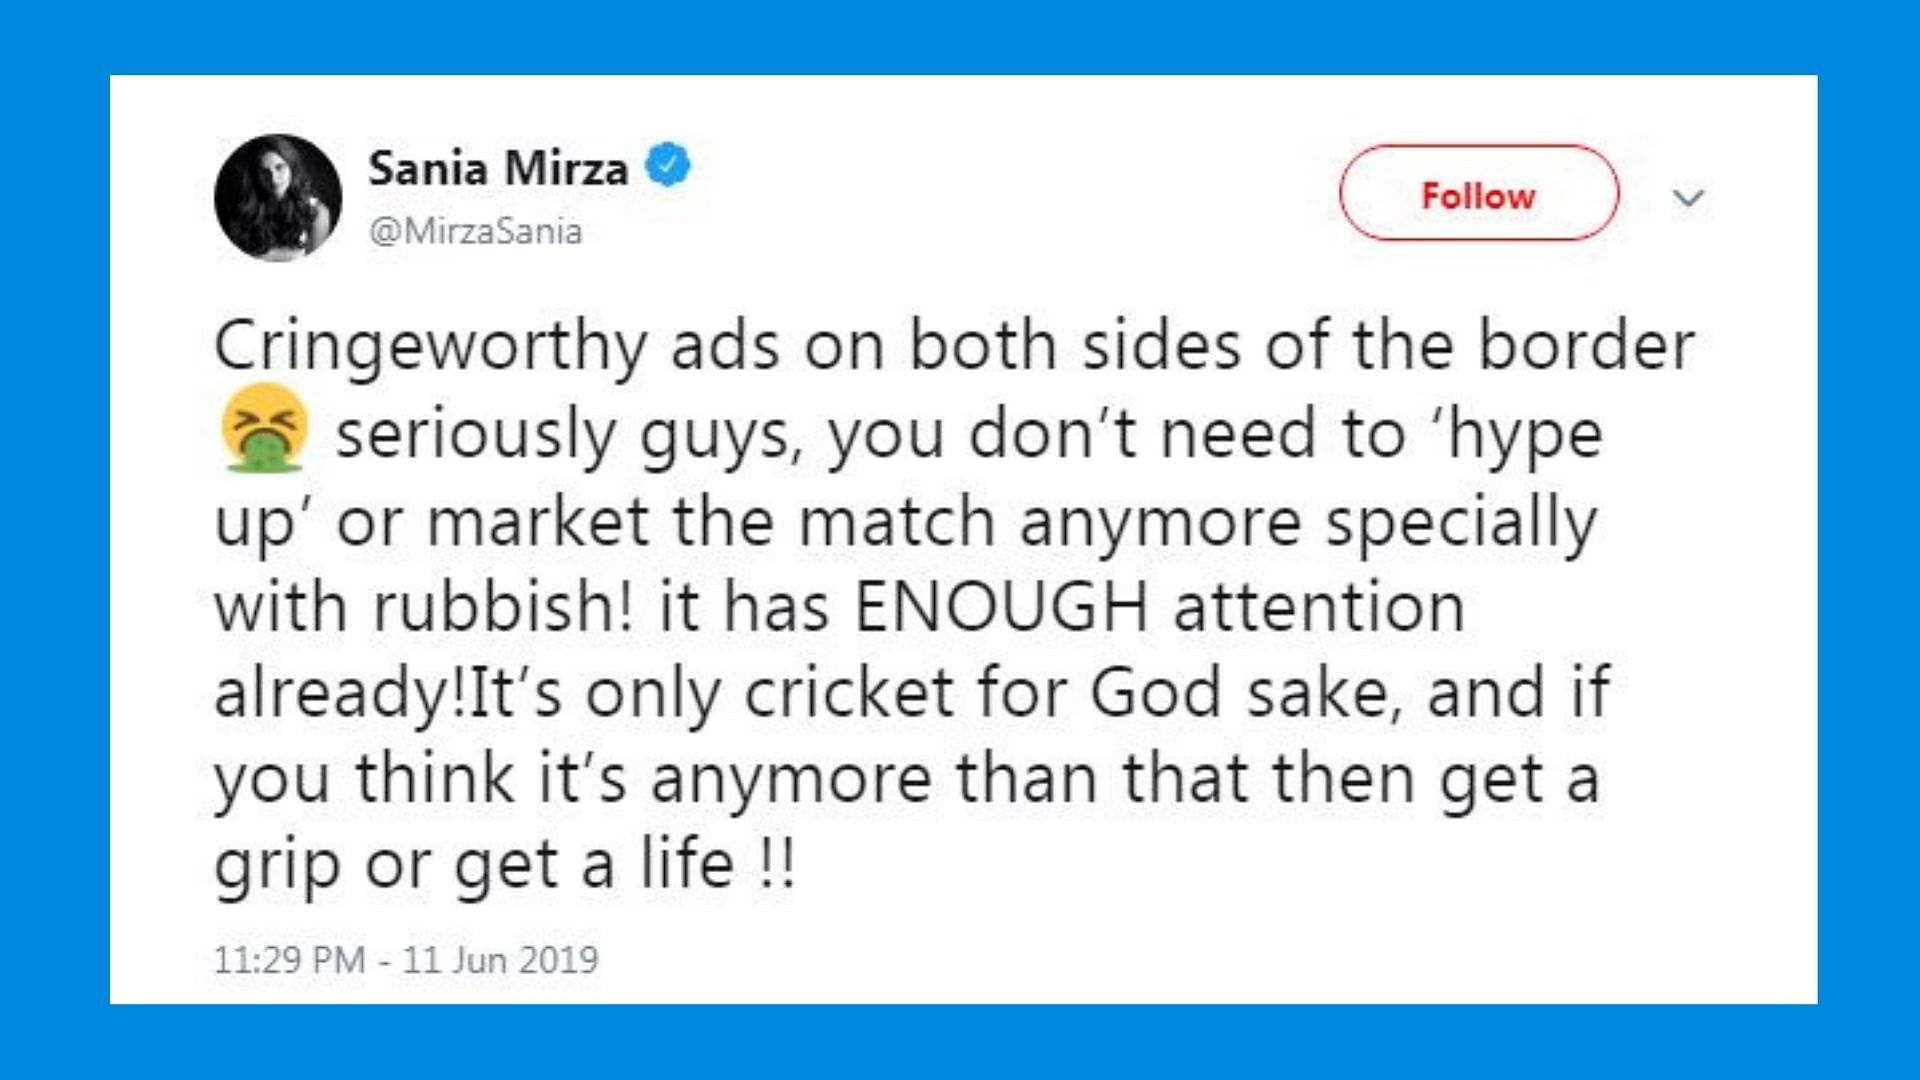 Ahead of the much awaited India-Pak match this Sunday, Sania Mirza calls out the cringe worthy advertisements